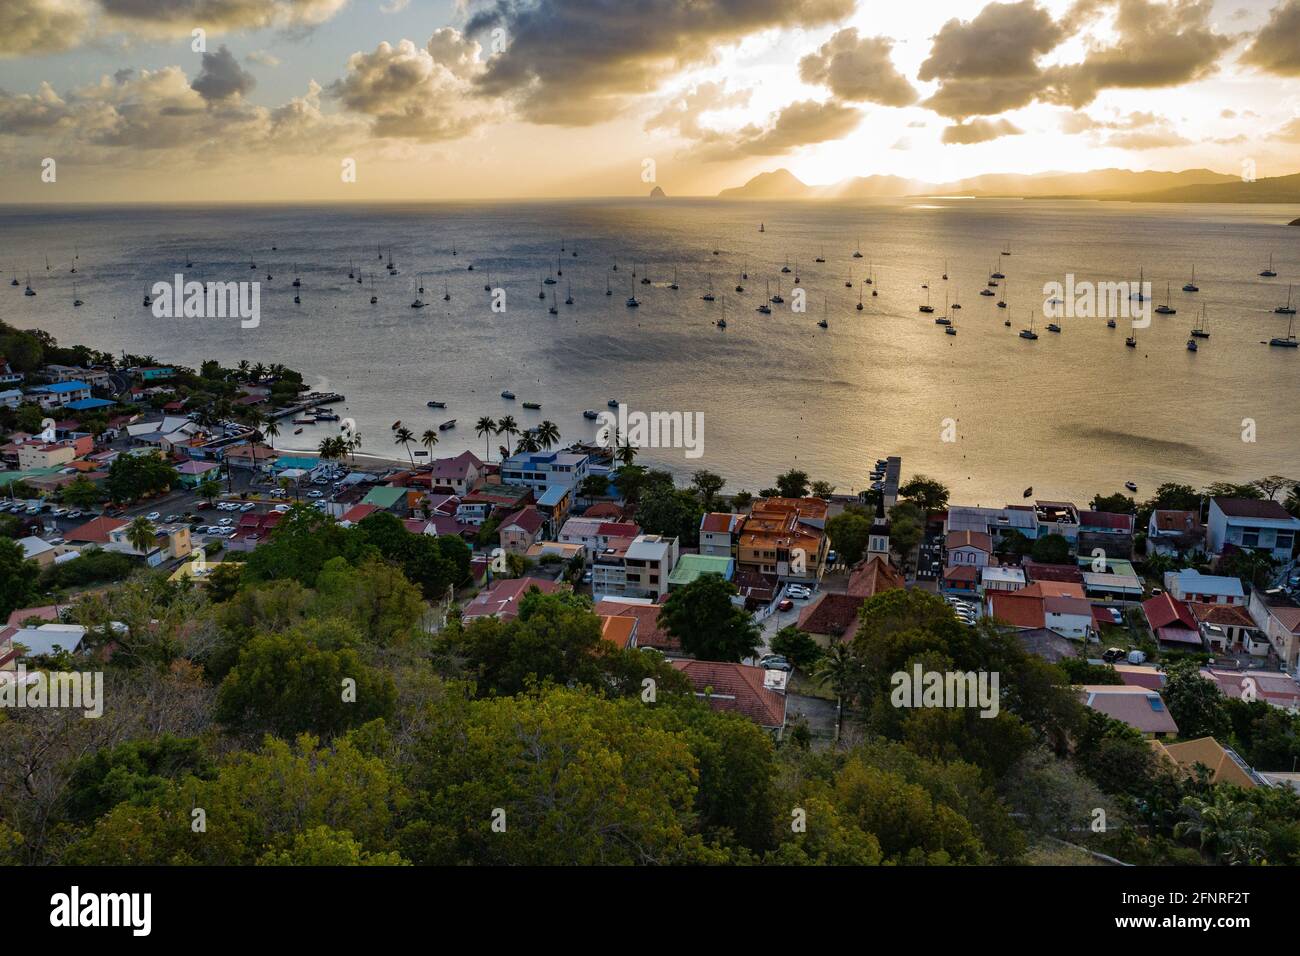 Sainte-Anne is the southernmost town of Martinique. It overlooks the magnificent bay which welcomes a large number of boats Stock Photo